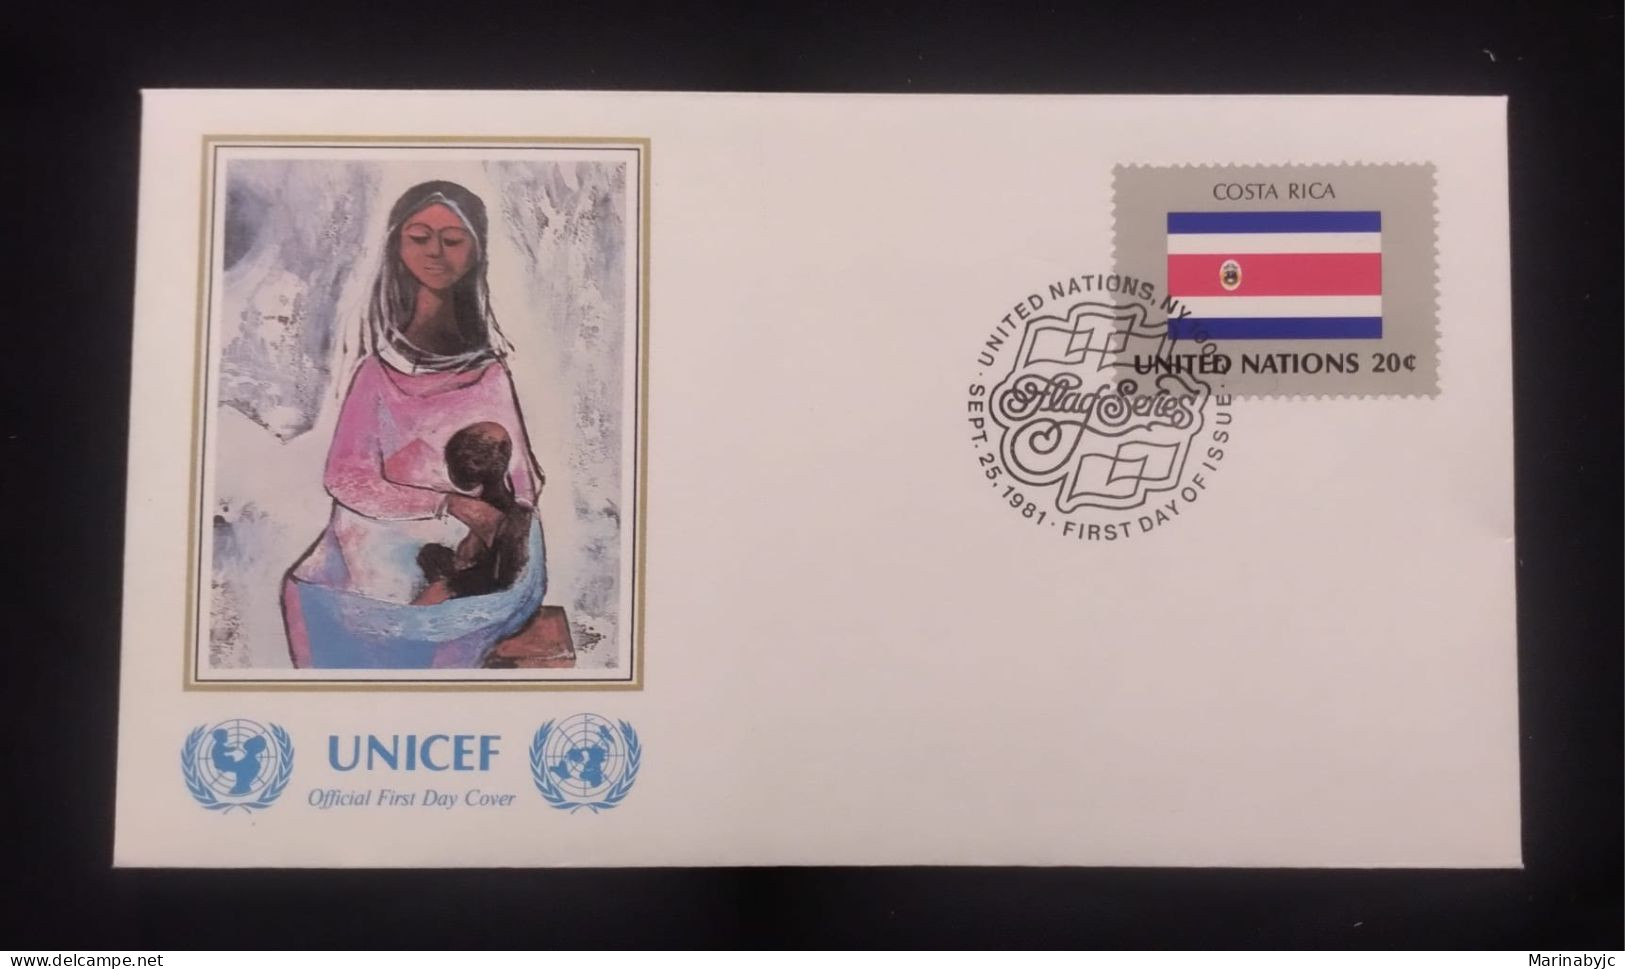 EL)1980 UNITED NATIONS, NATIONAL FLAG OF THE MEMBER COUNTRIES, COSTA RICA, ART - MOTHER AND CHILD PAINTING, UNICEF, FDC - Neufs